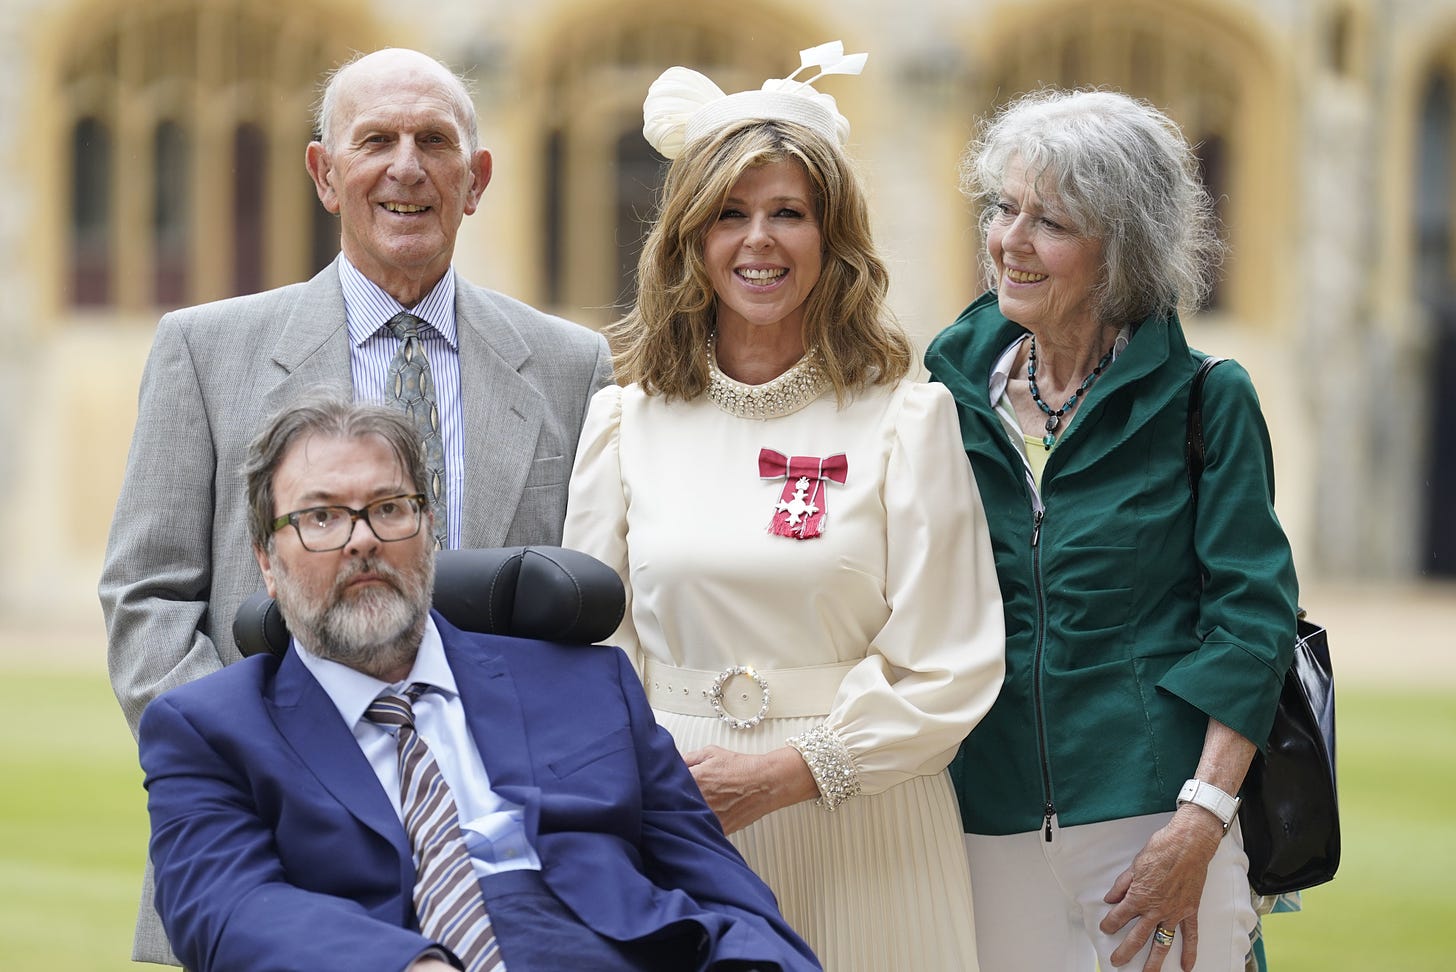 Kate Garraway, with her husband Derek Draper and her parents Gordon and Marilyn Garraway, after being made a Member of the Order of the British Empire for her services to broadcasting, journalism and charity by the Prince of Wales during an investiture ceremony at Windsor Castle, Berkshire. Picture date: Wednesday June 28, 2023.